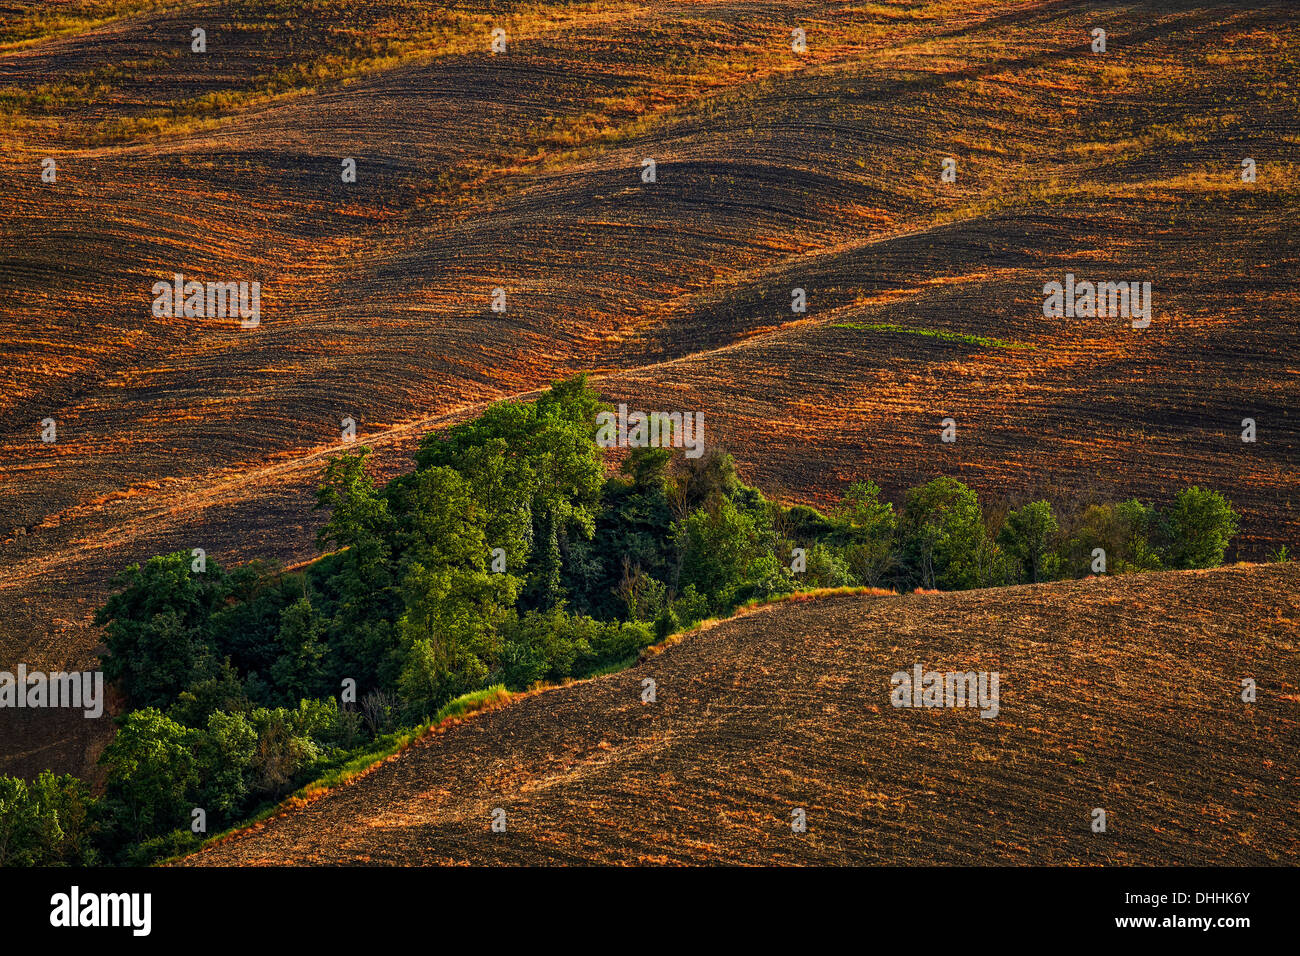 Fallow field with a ditch where trees are growing, Pievina, Asciano, Province of Siena, Tuscany, Italy Stock Photo